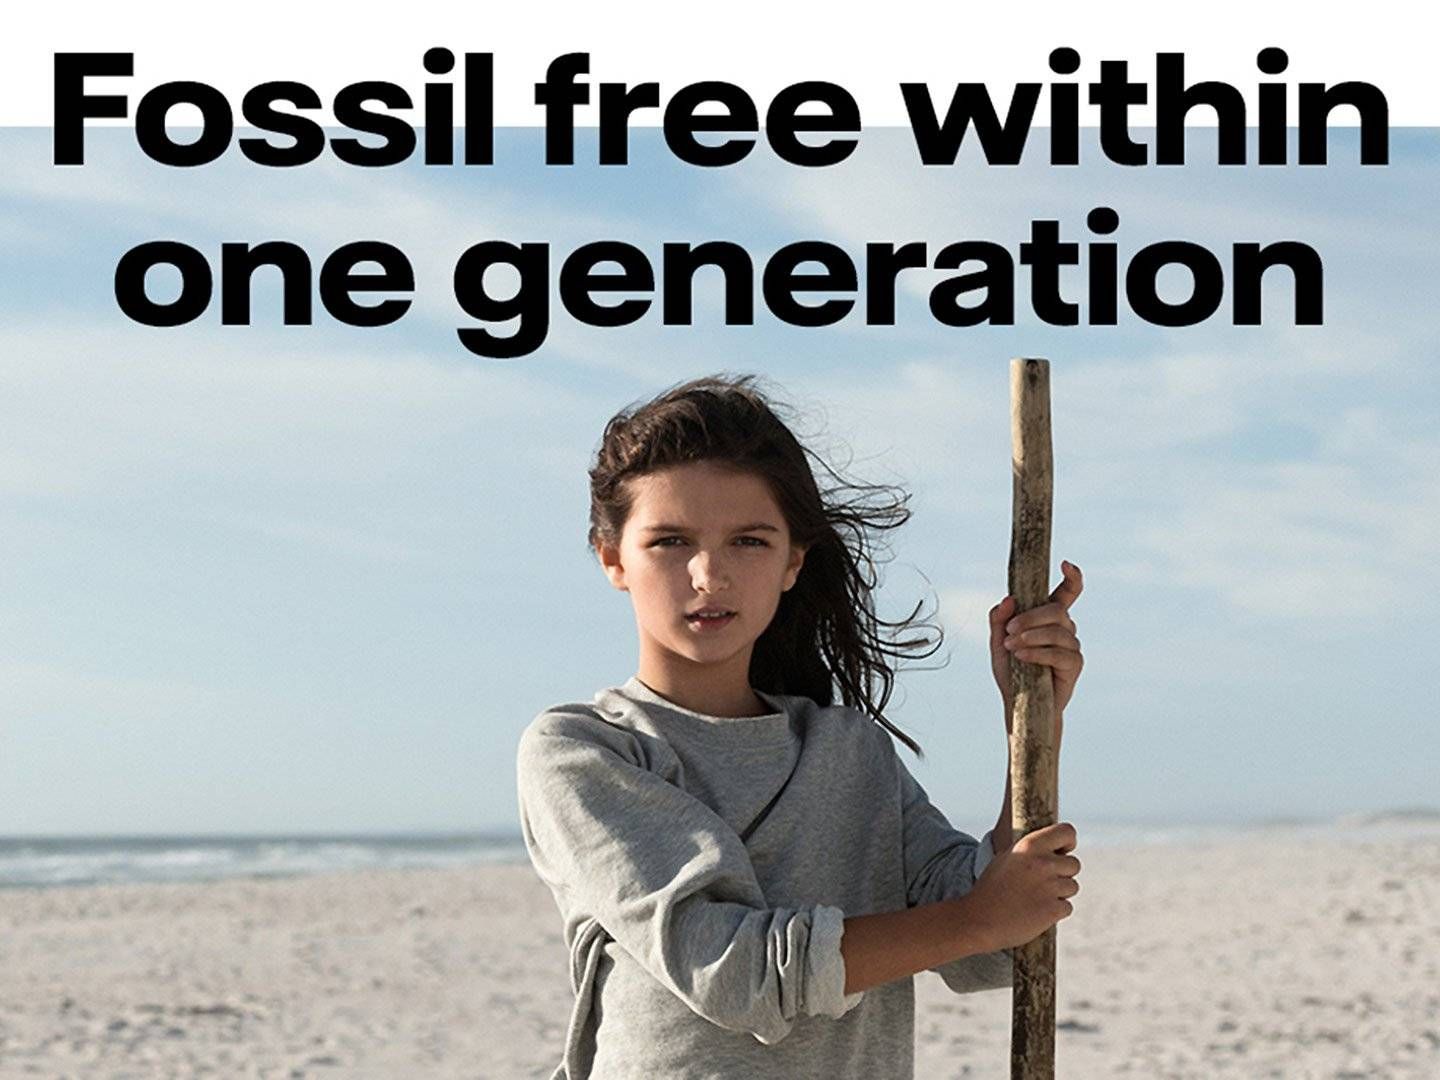 In 2017, Vattenfall launched its strategy to be fossil-free within one generation. After a raised finger from the authorities, it is now dropped as a slogan. | Photo: Vattenfall